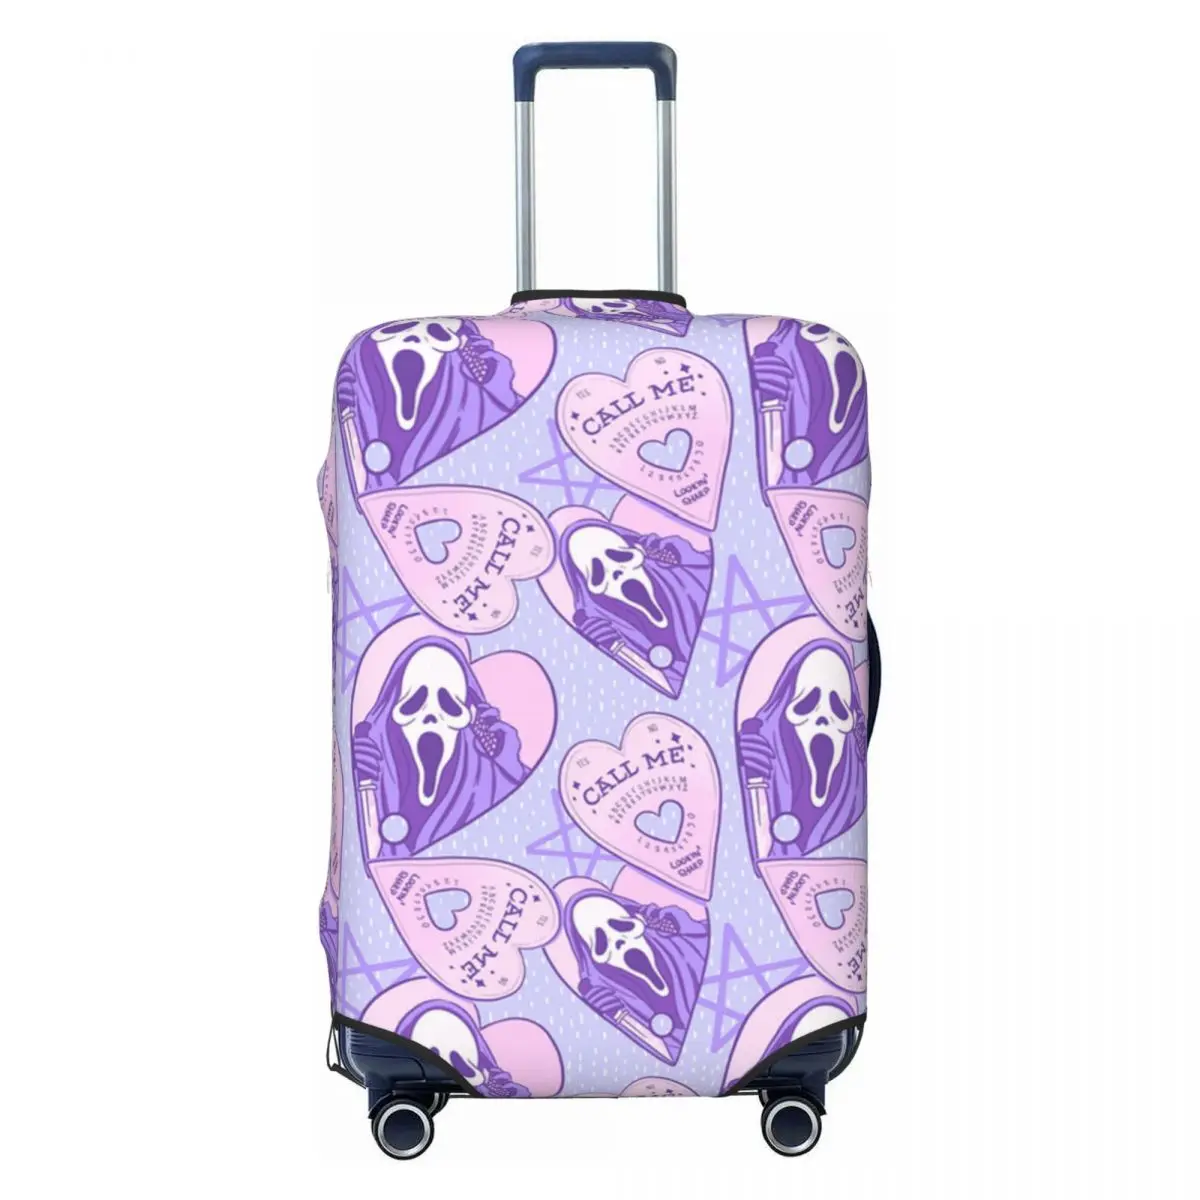 

Cute Horror Movie Scream Luggage Cover Protector Elastic Halloween Ghost Killer Travel Suitcase Covers